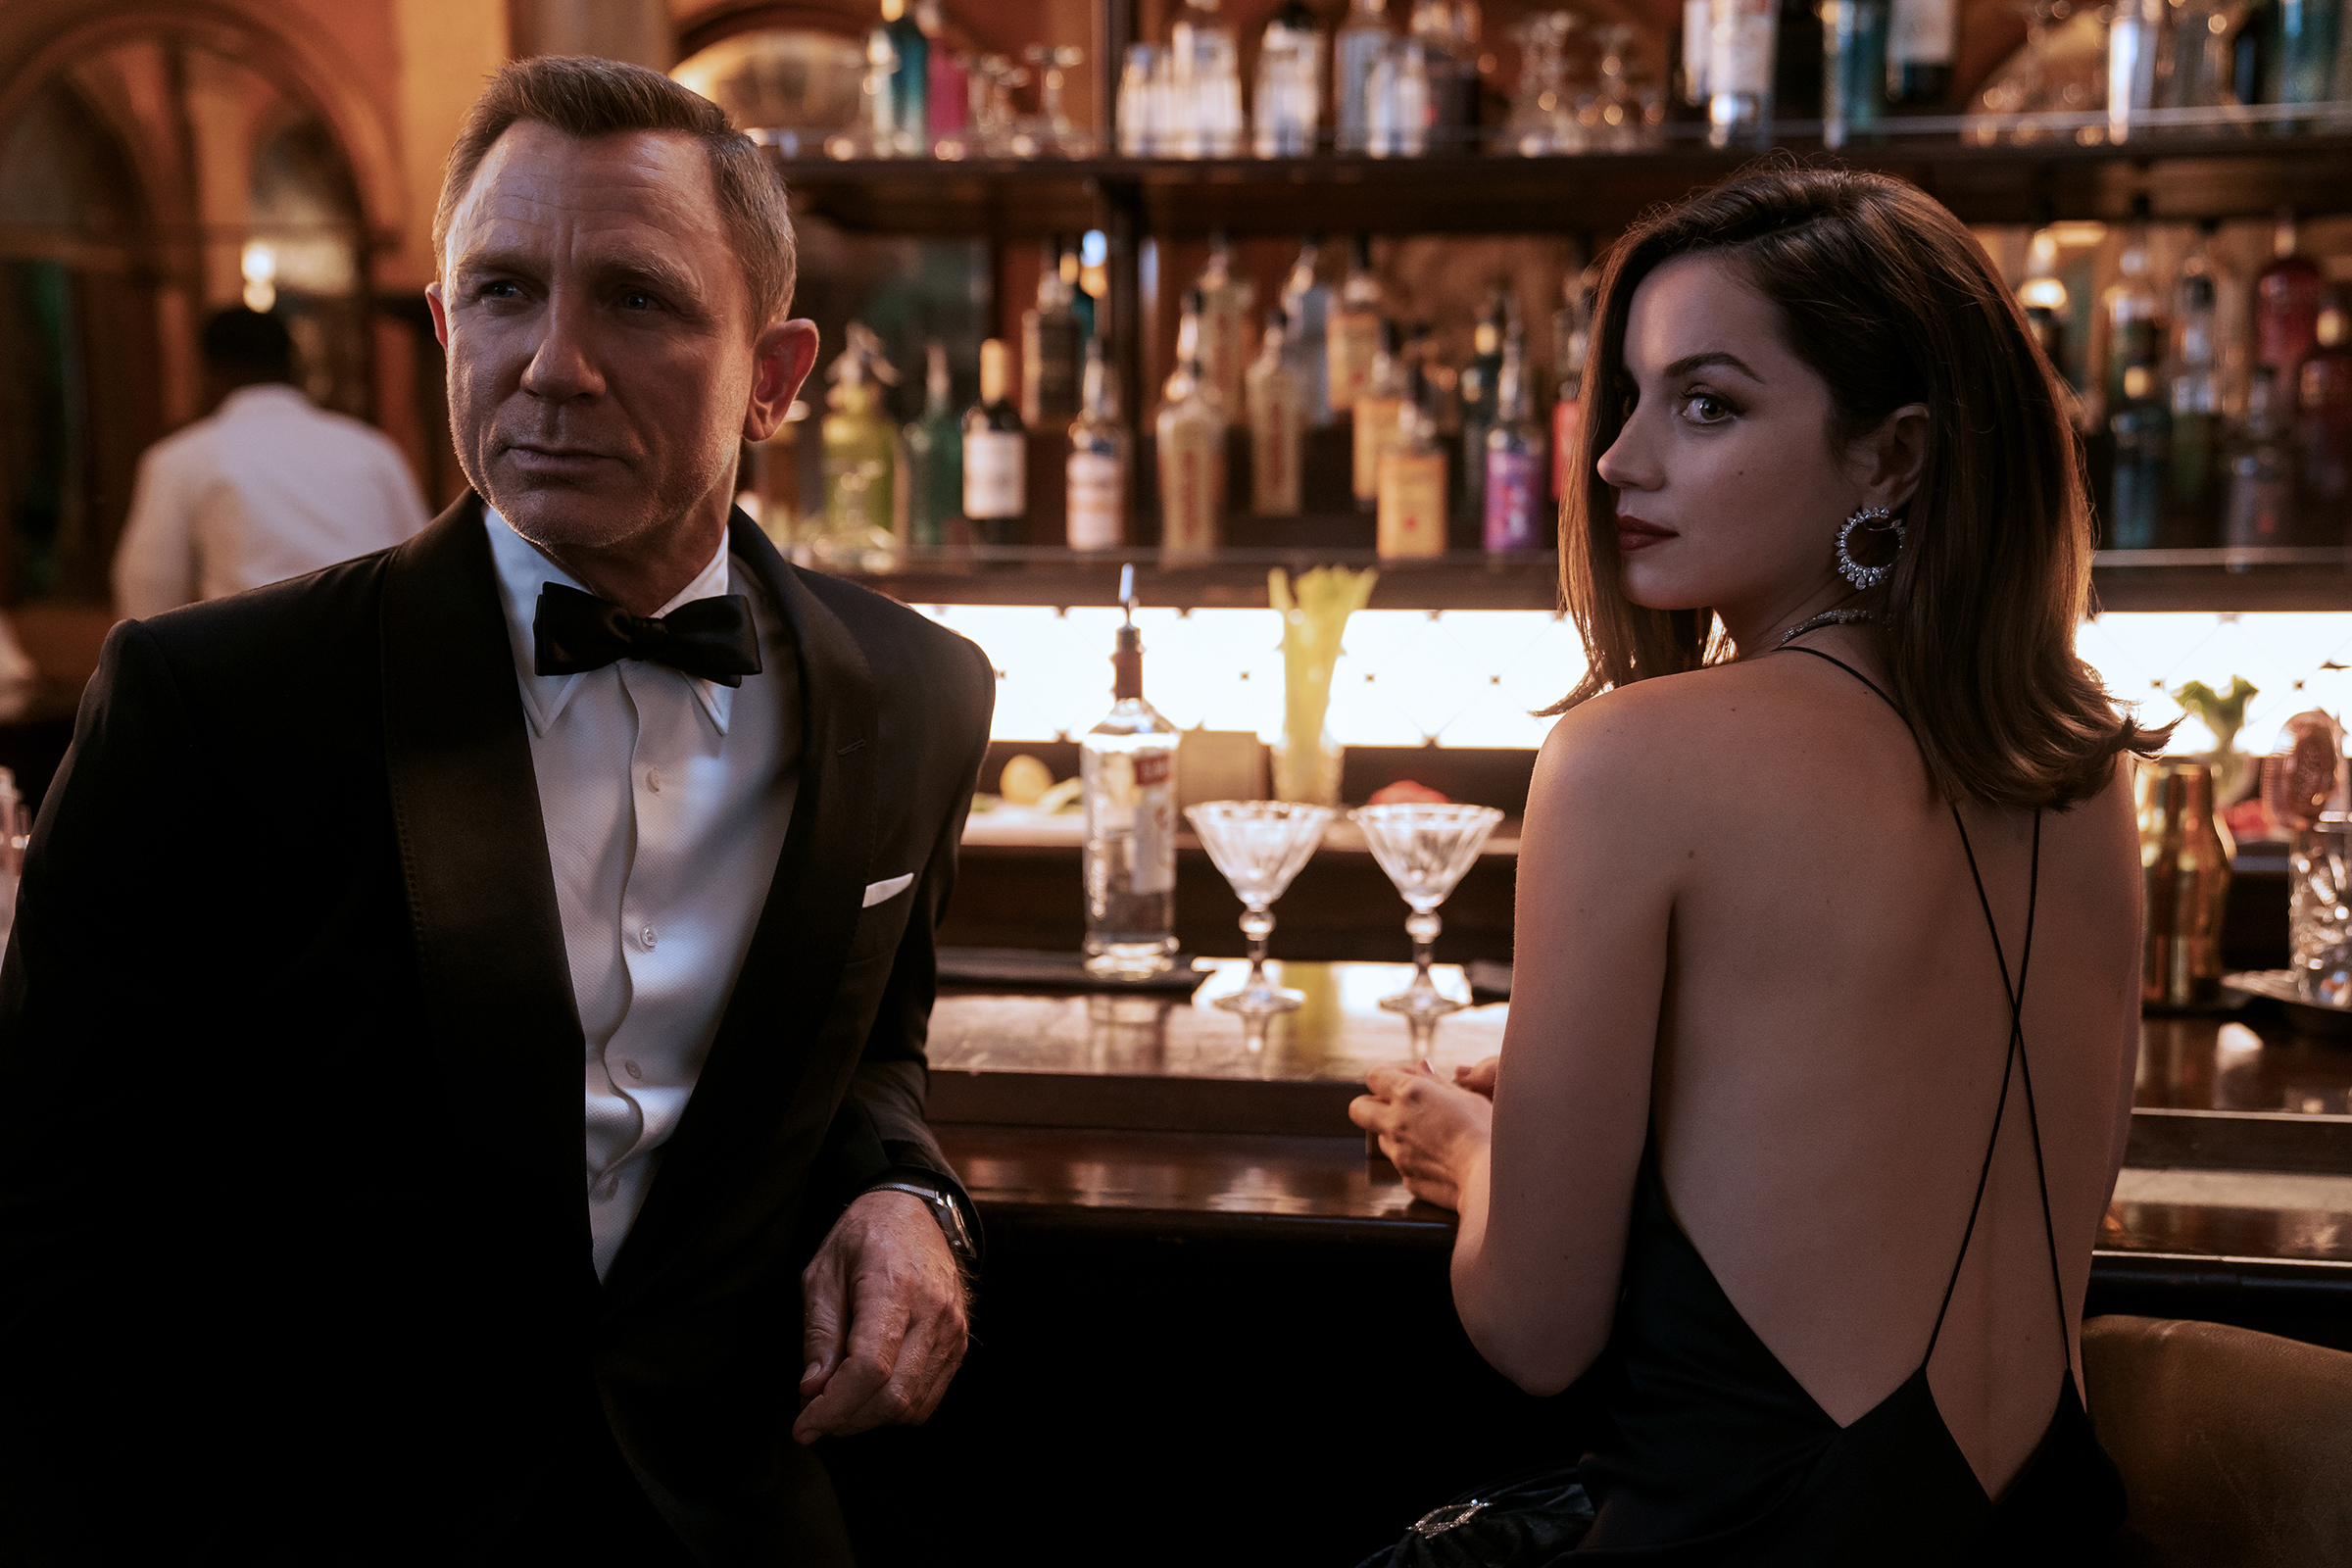 James Bond (Daniel Craig) and Paloma (Ana de Armas) sit at a bar in NO TIME TO DIE, an EON Productions and Metro-Goldwyn-Mayer Studios film